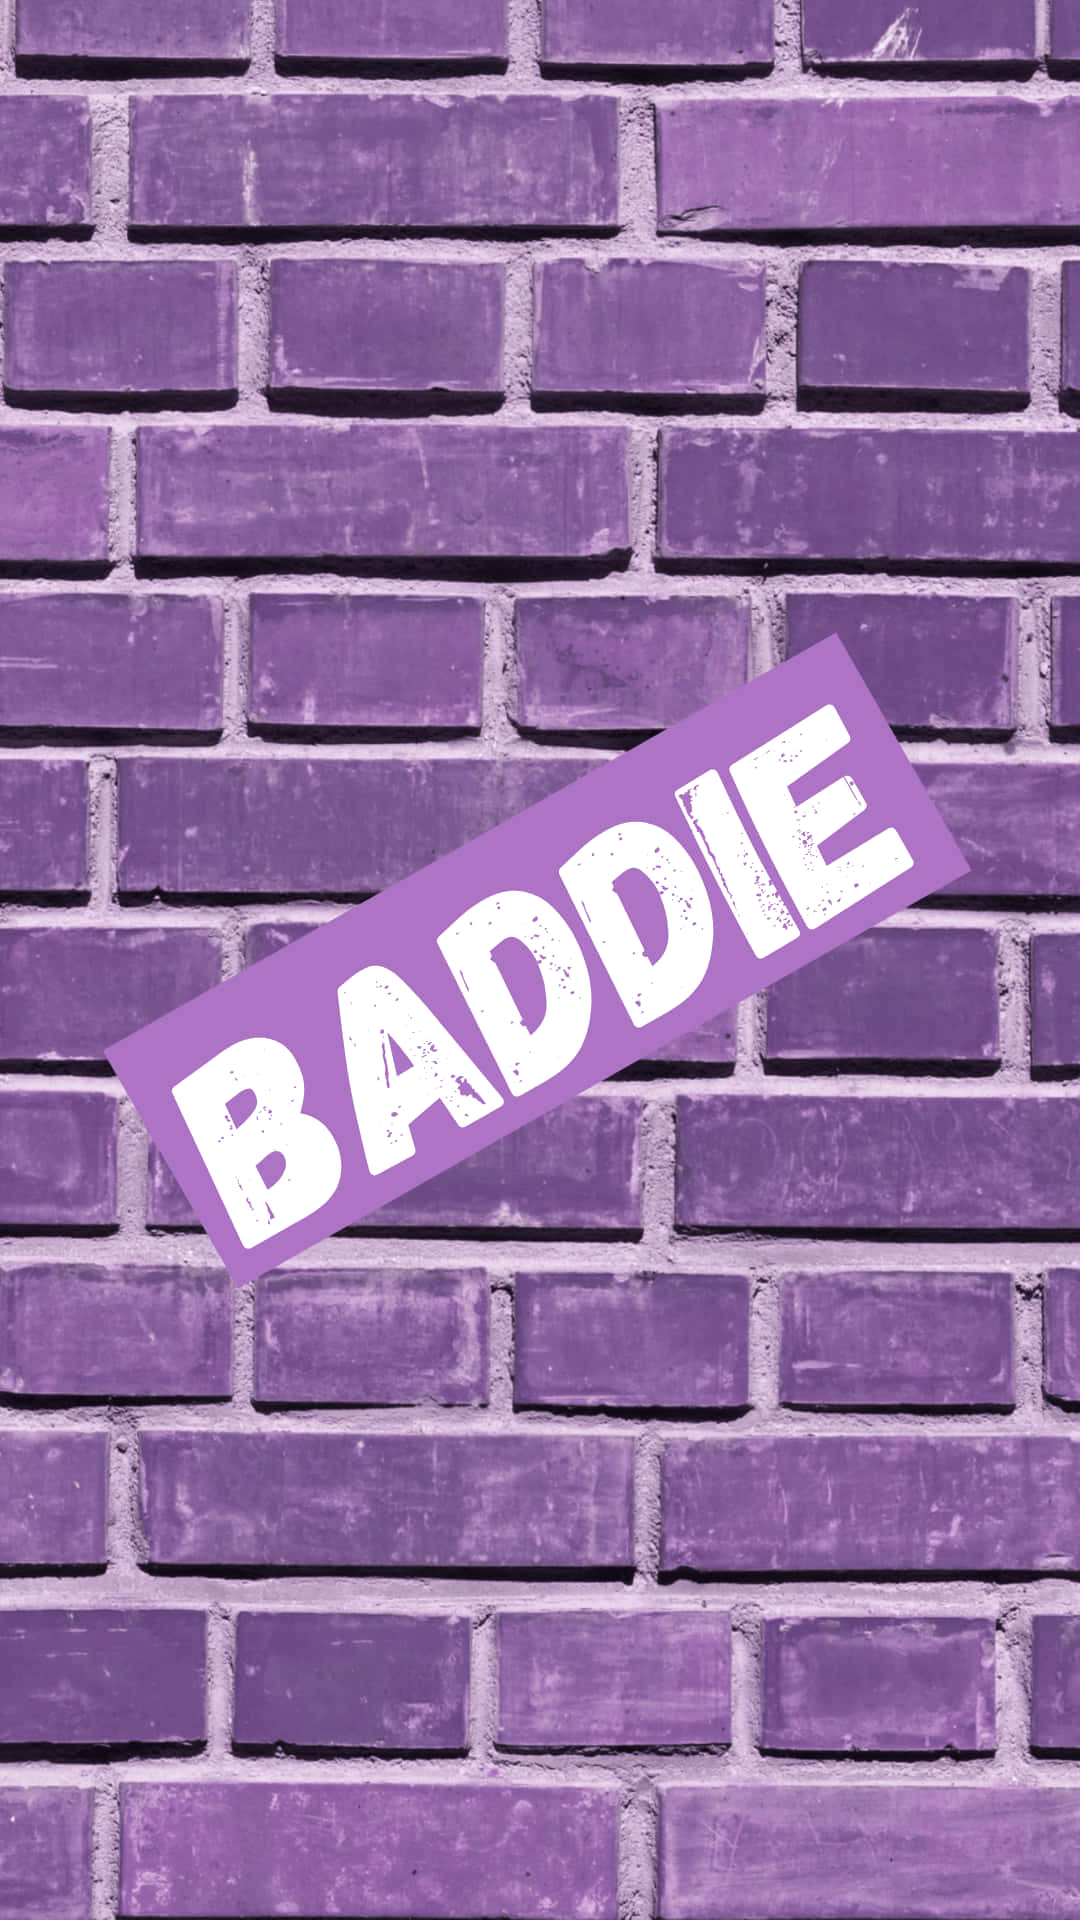 Aesthetic purple baddie rocking with her sassy style Wallpaper